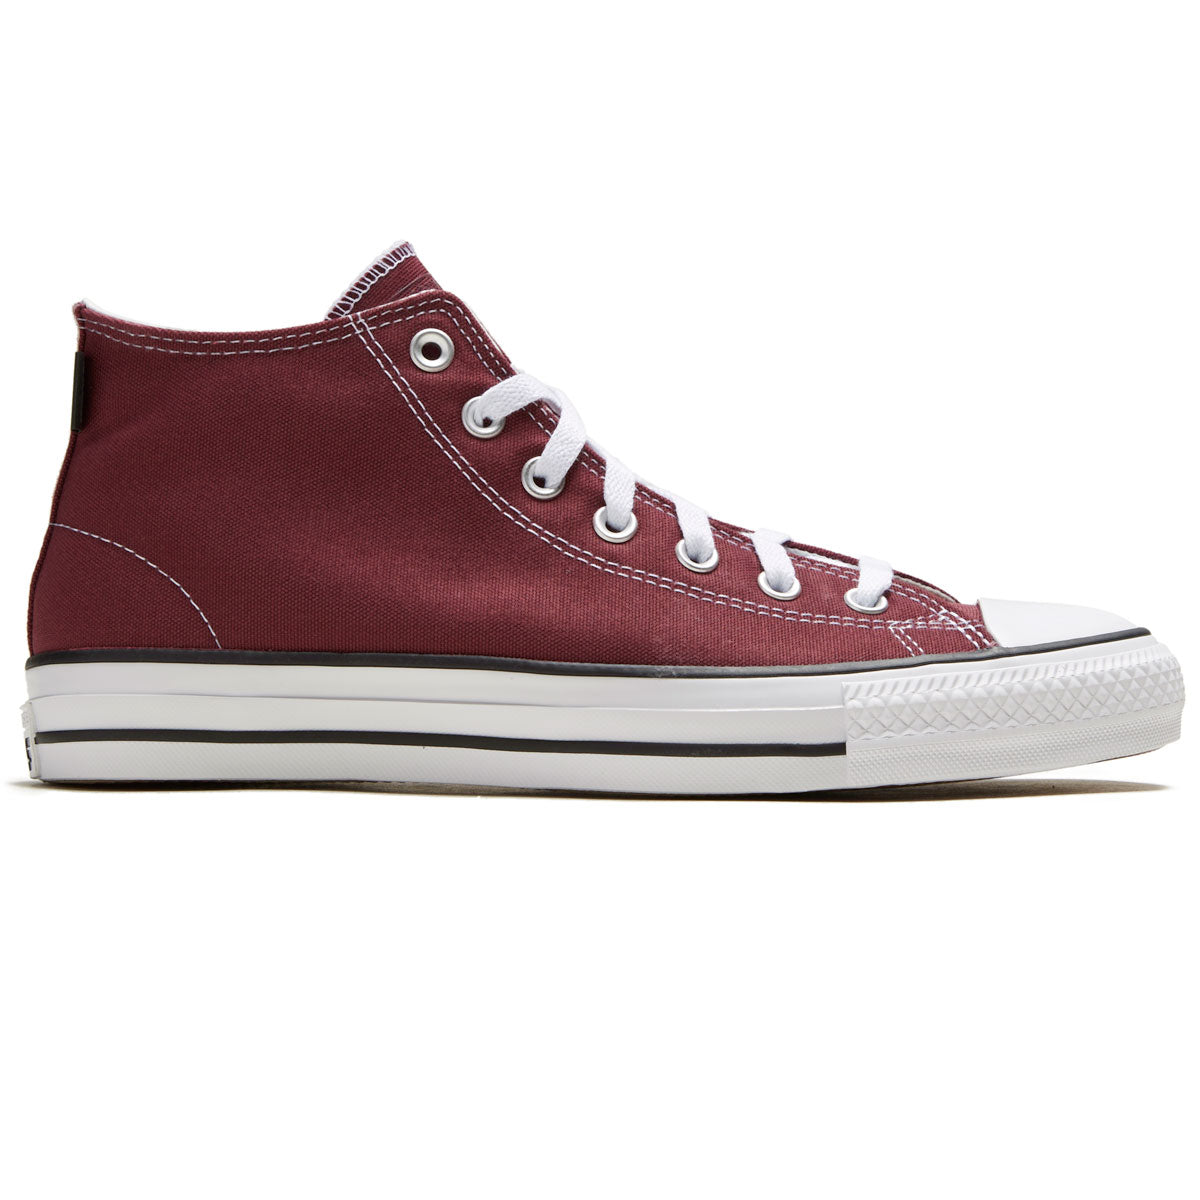 Converse Chuck Taylor All Star Pro Mid Shoes - Cherry Vision/White/Whi – CCS